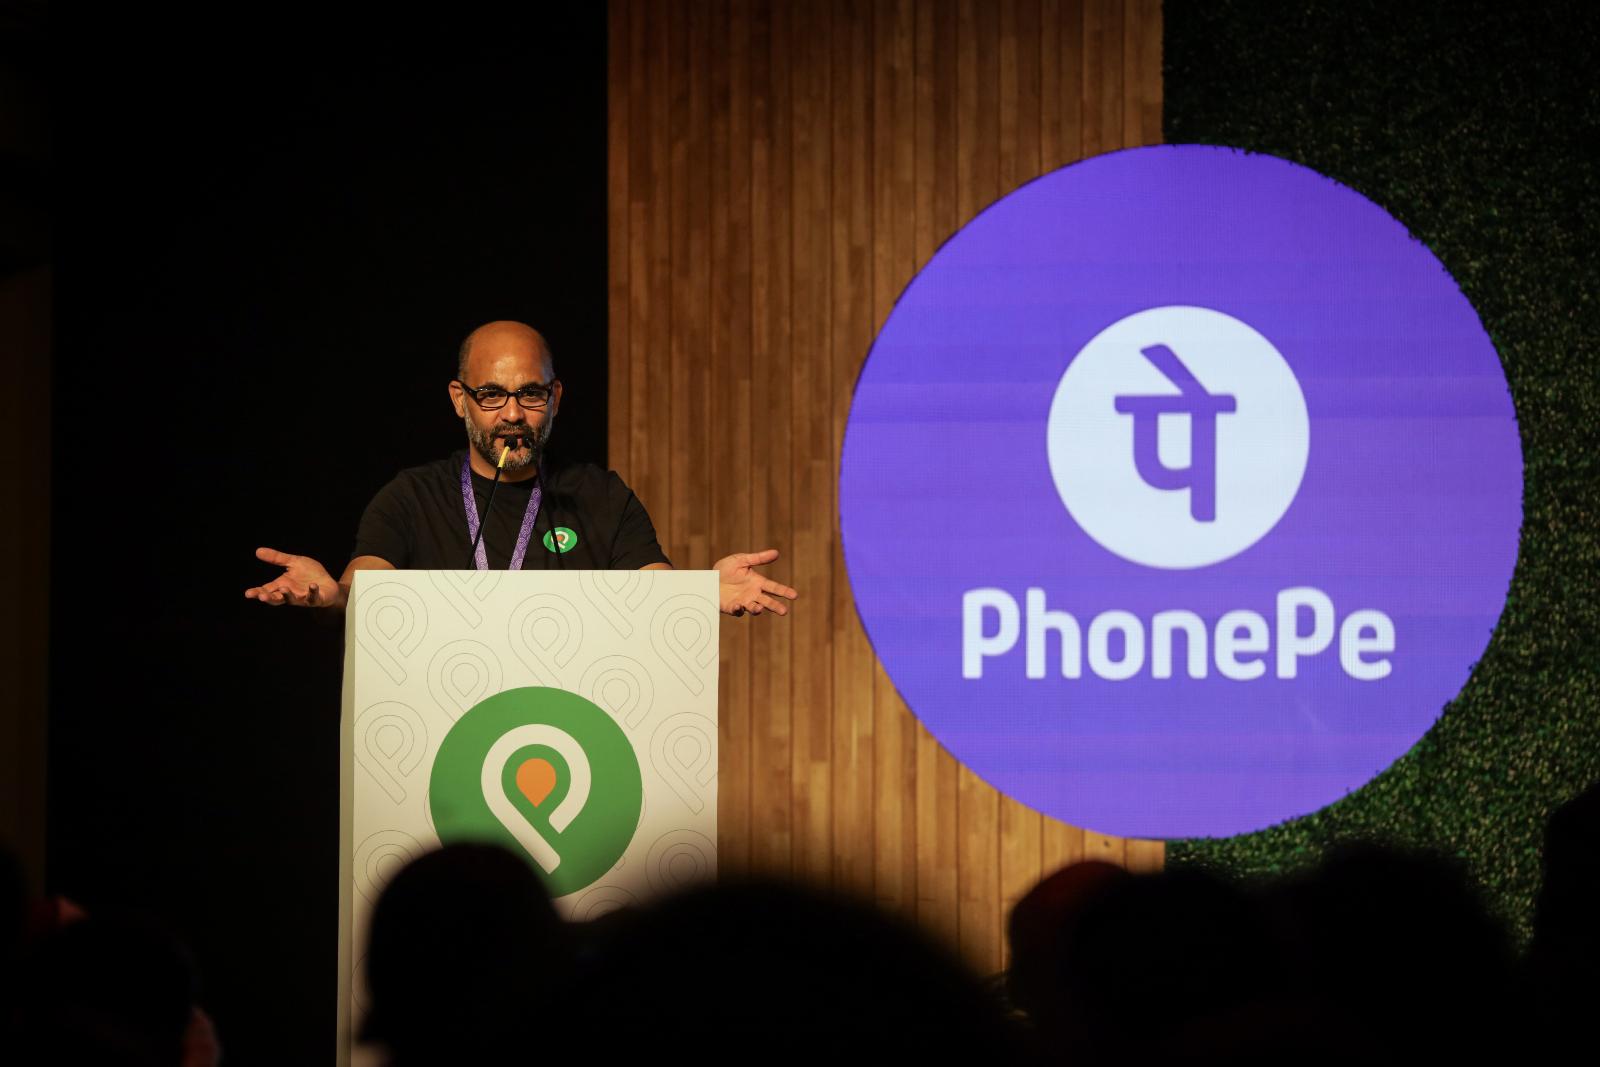 Walmart-backed PhonePe set to challenge Google’s dominance with app store in India